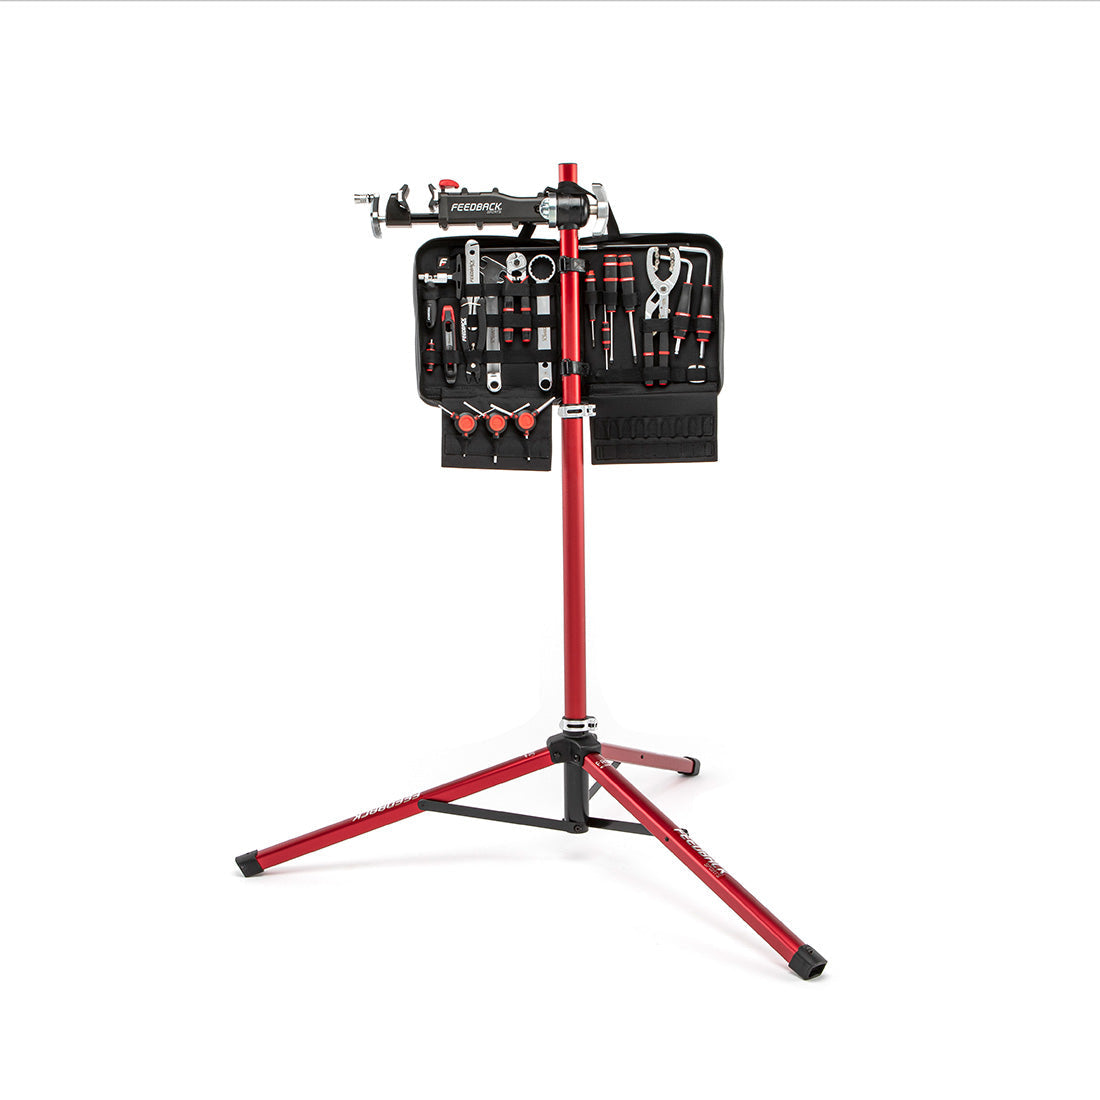 Feedback Sports Pro Mechanic bike repair stand deployed for use with tool kit on white background.